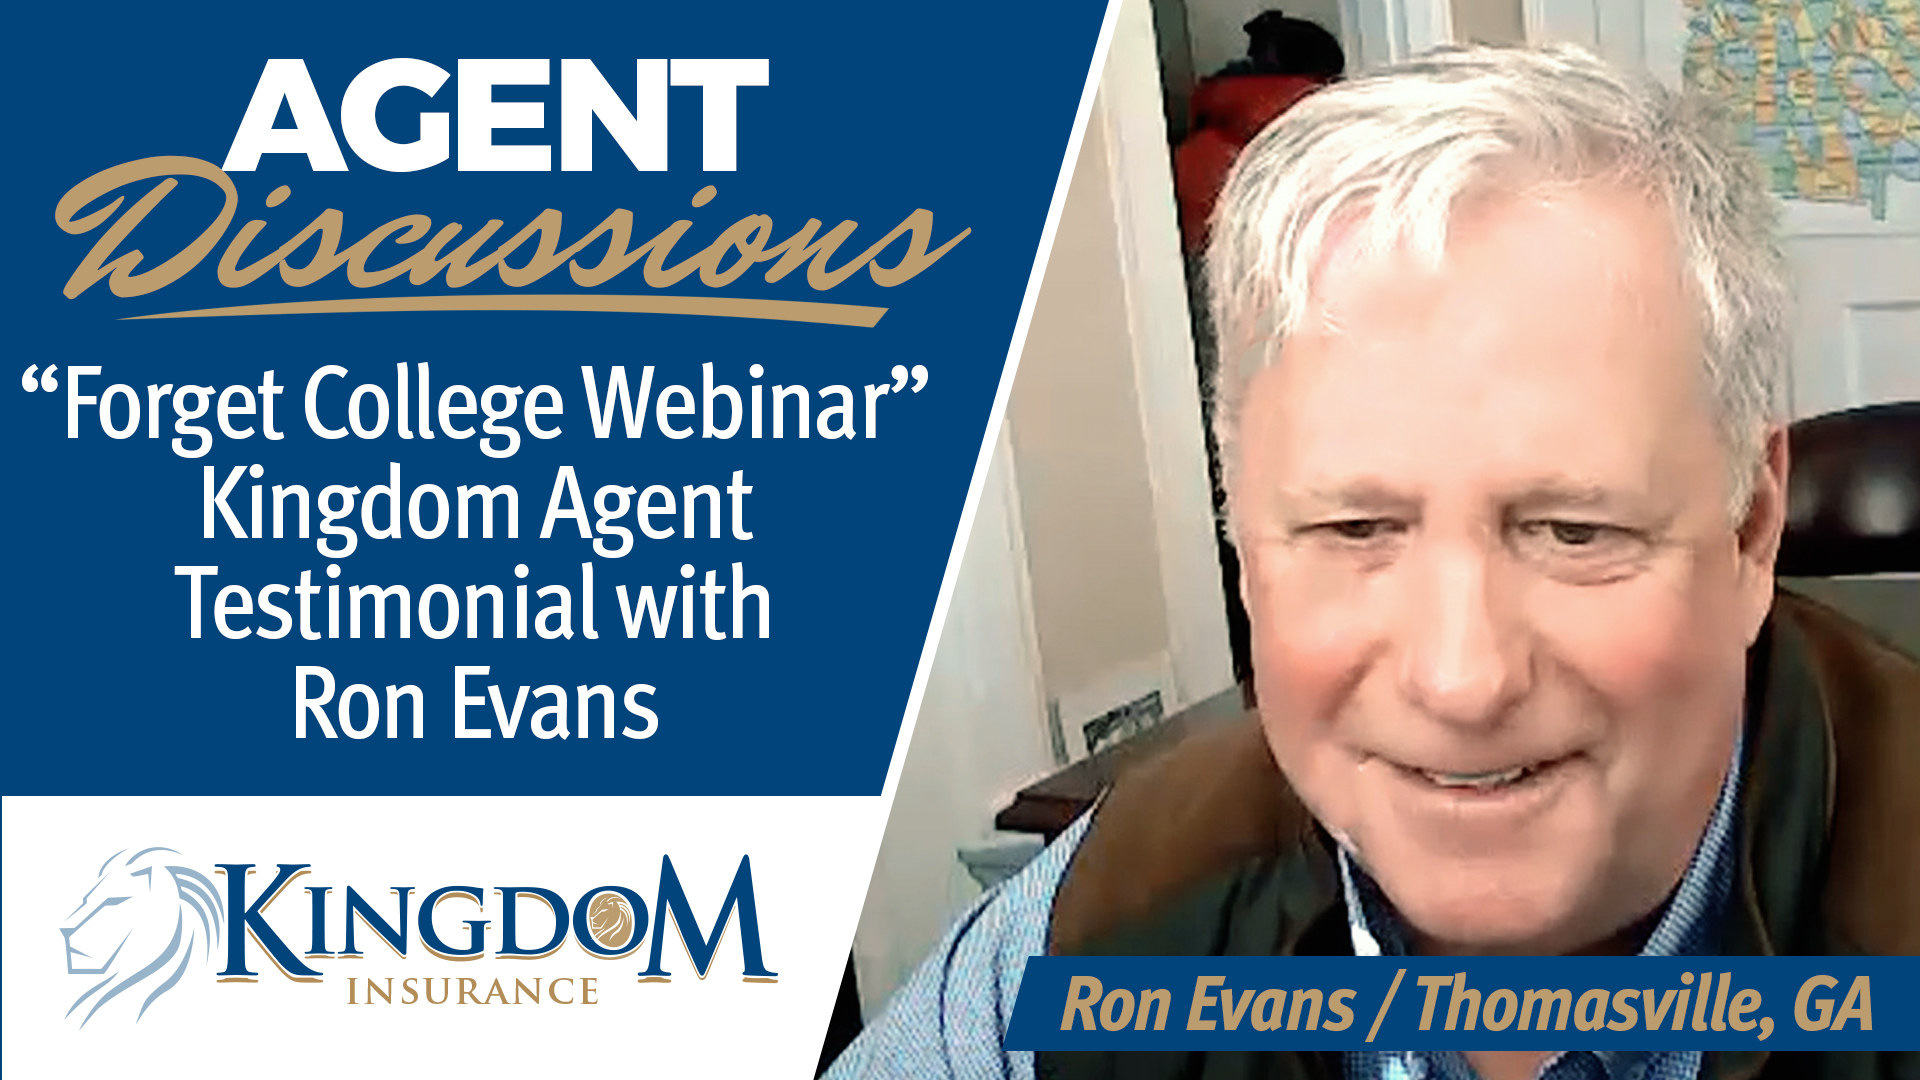 Kingdom Agent Discussion 2023 with Ron Evans